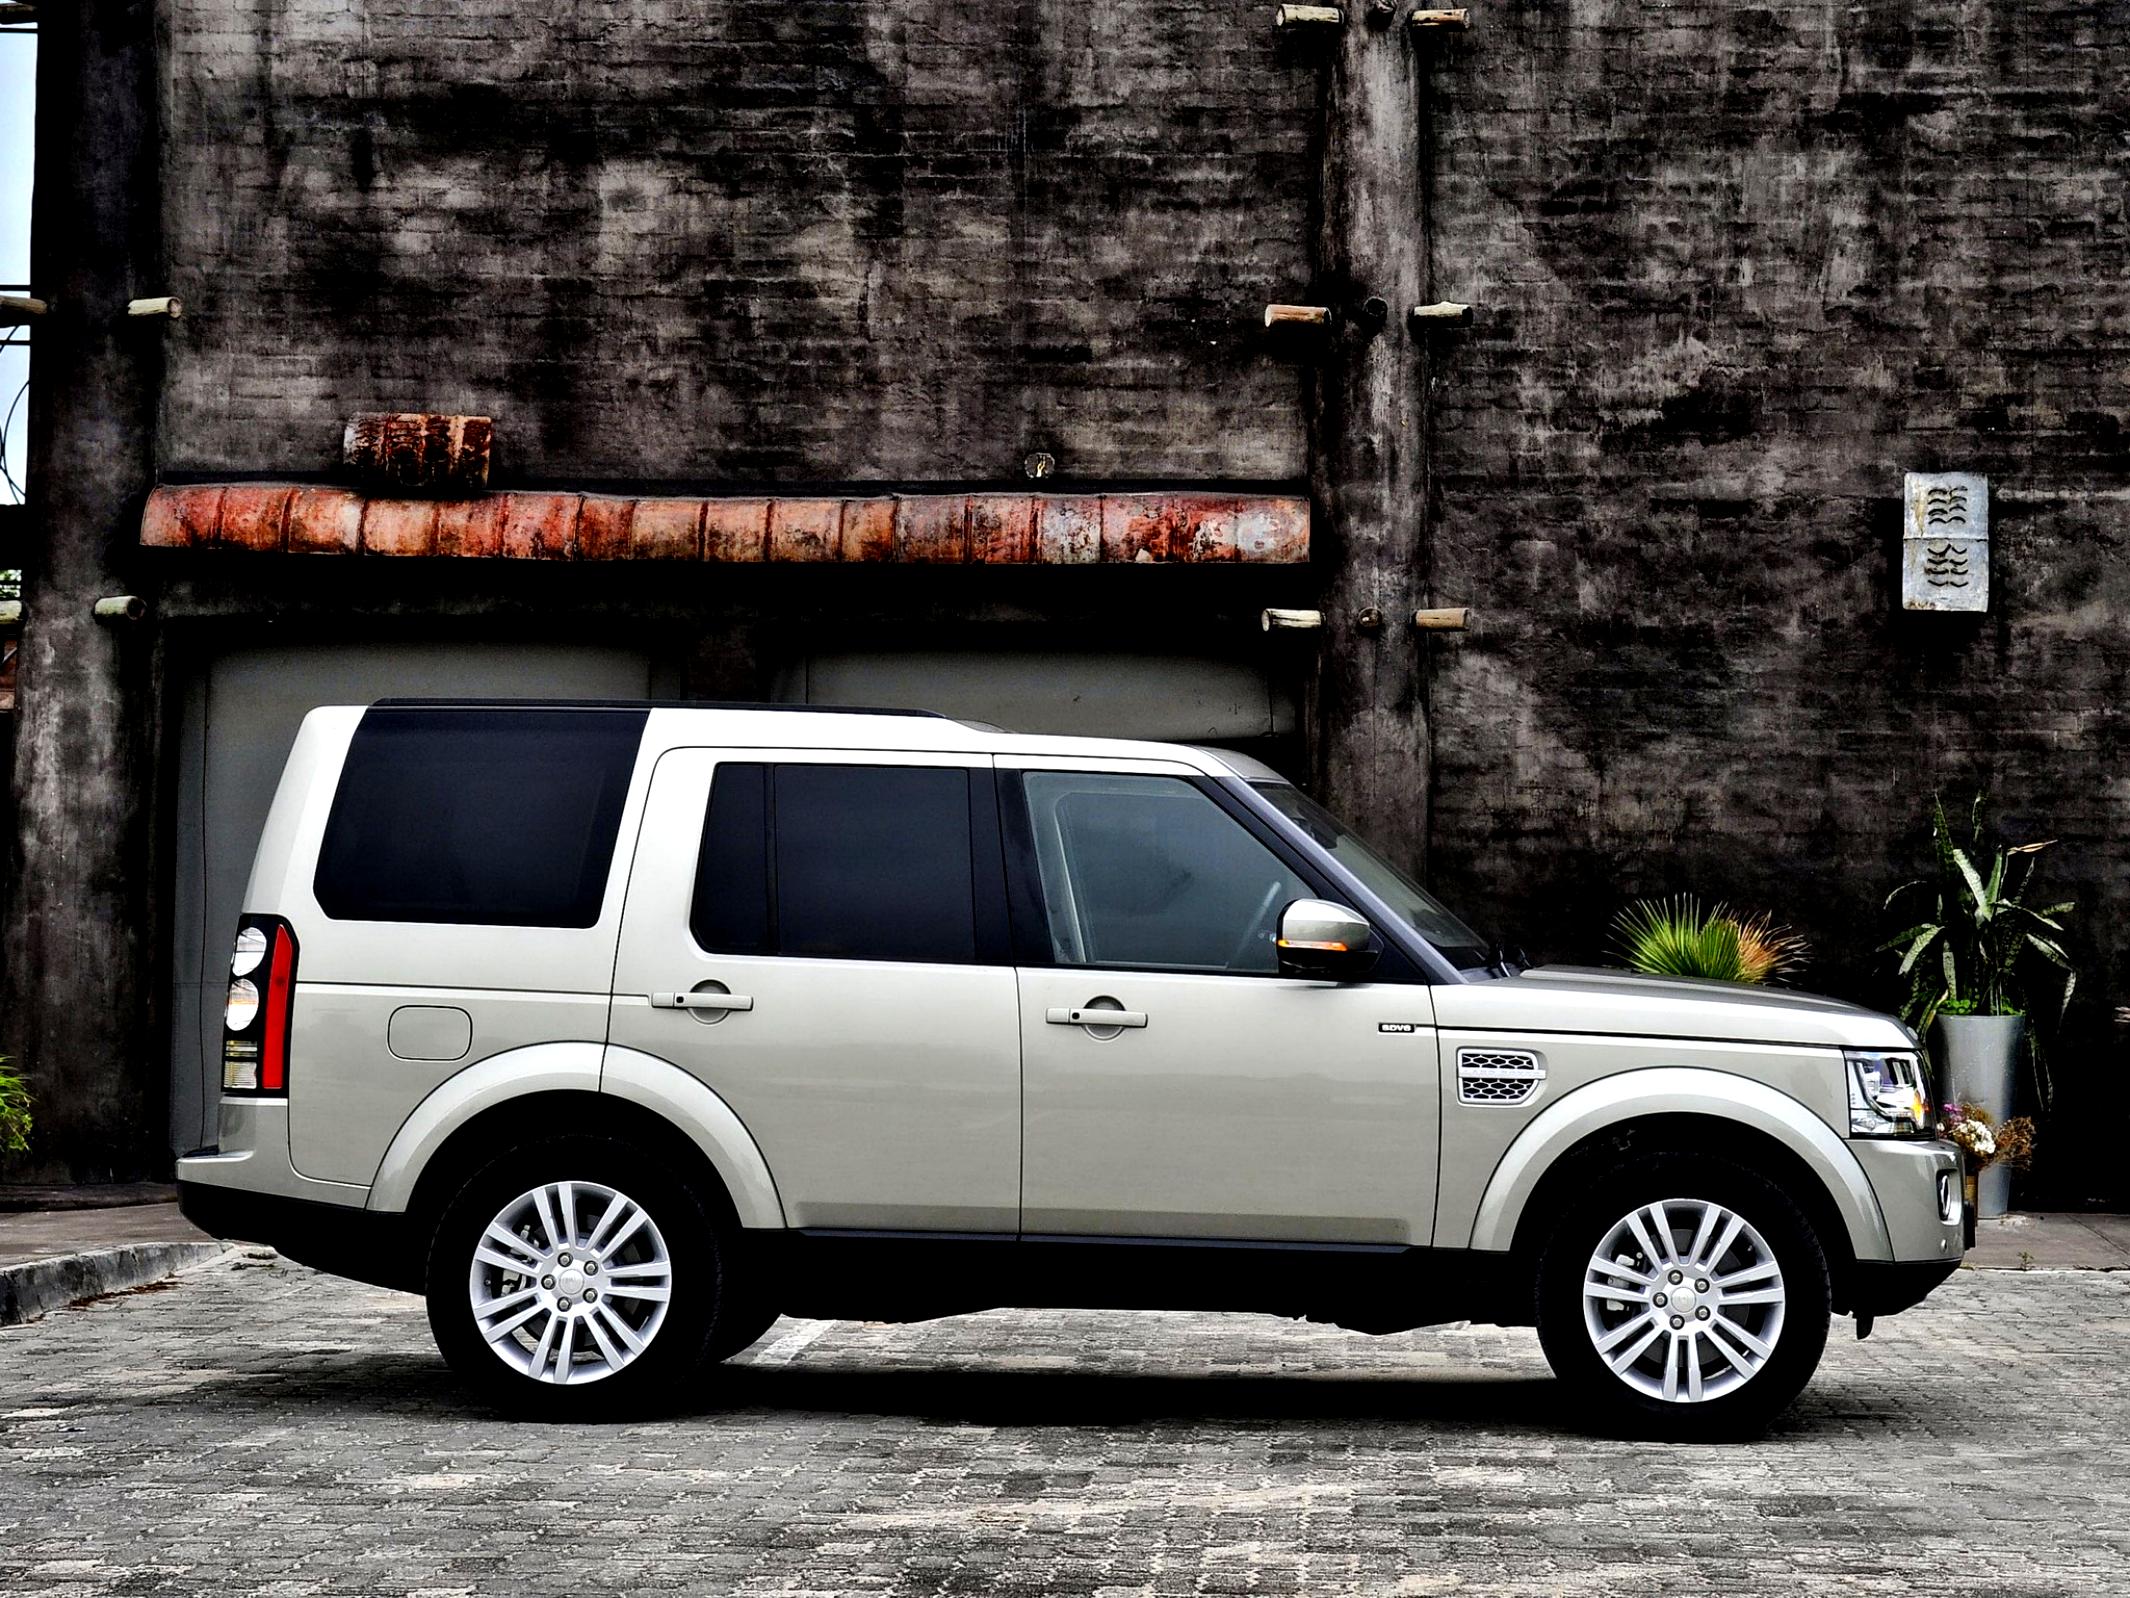 Land Rover Discovery - LR4 2013 #16